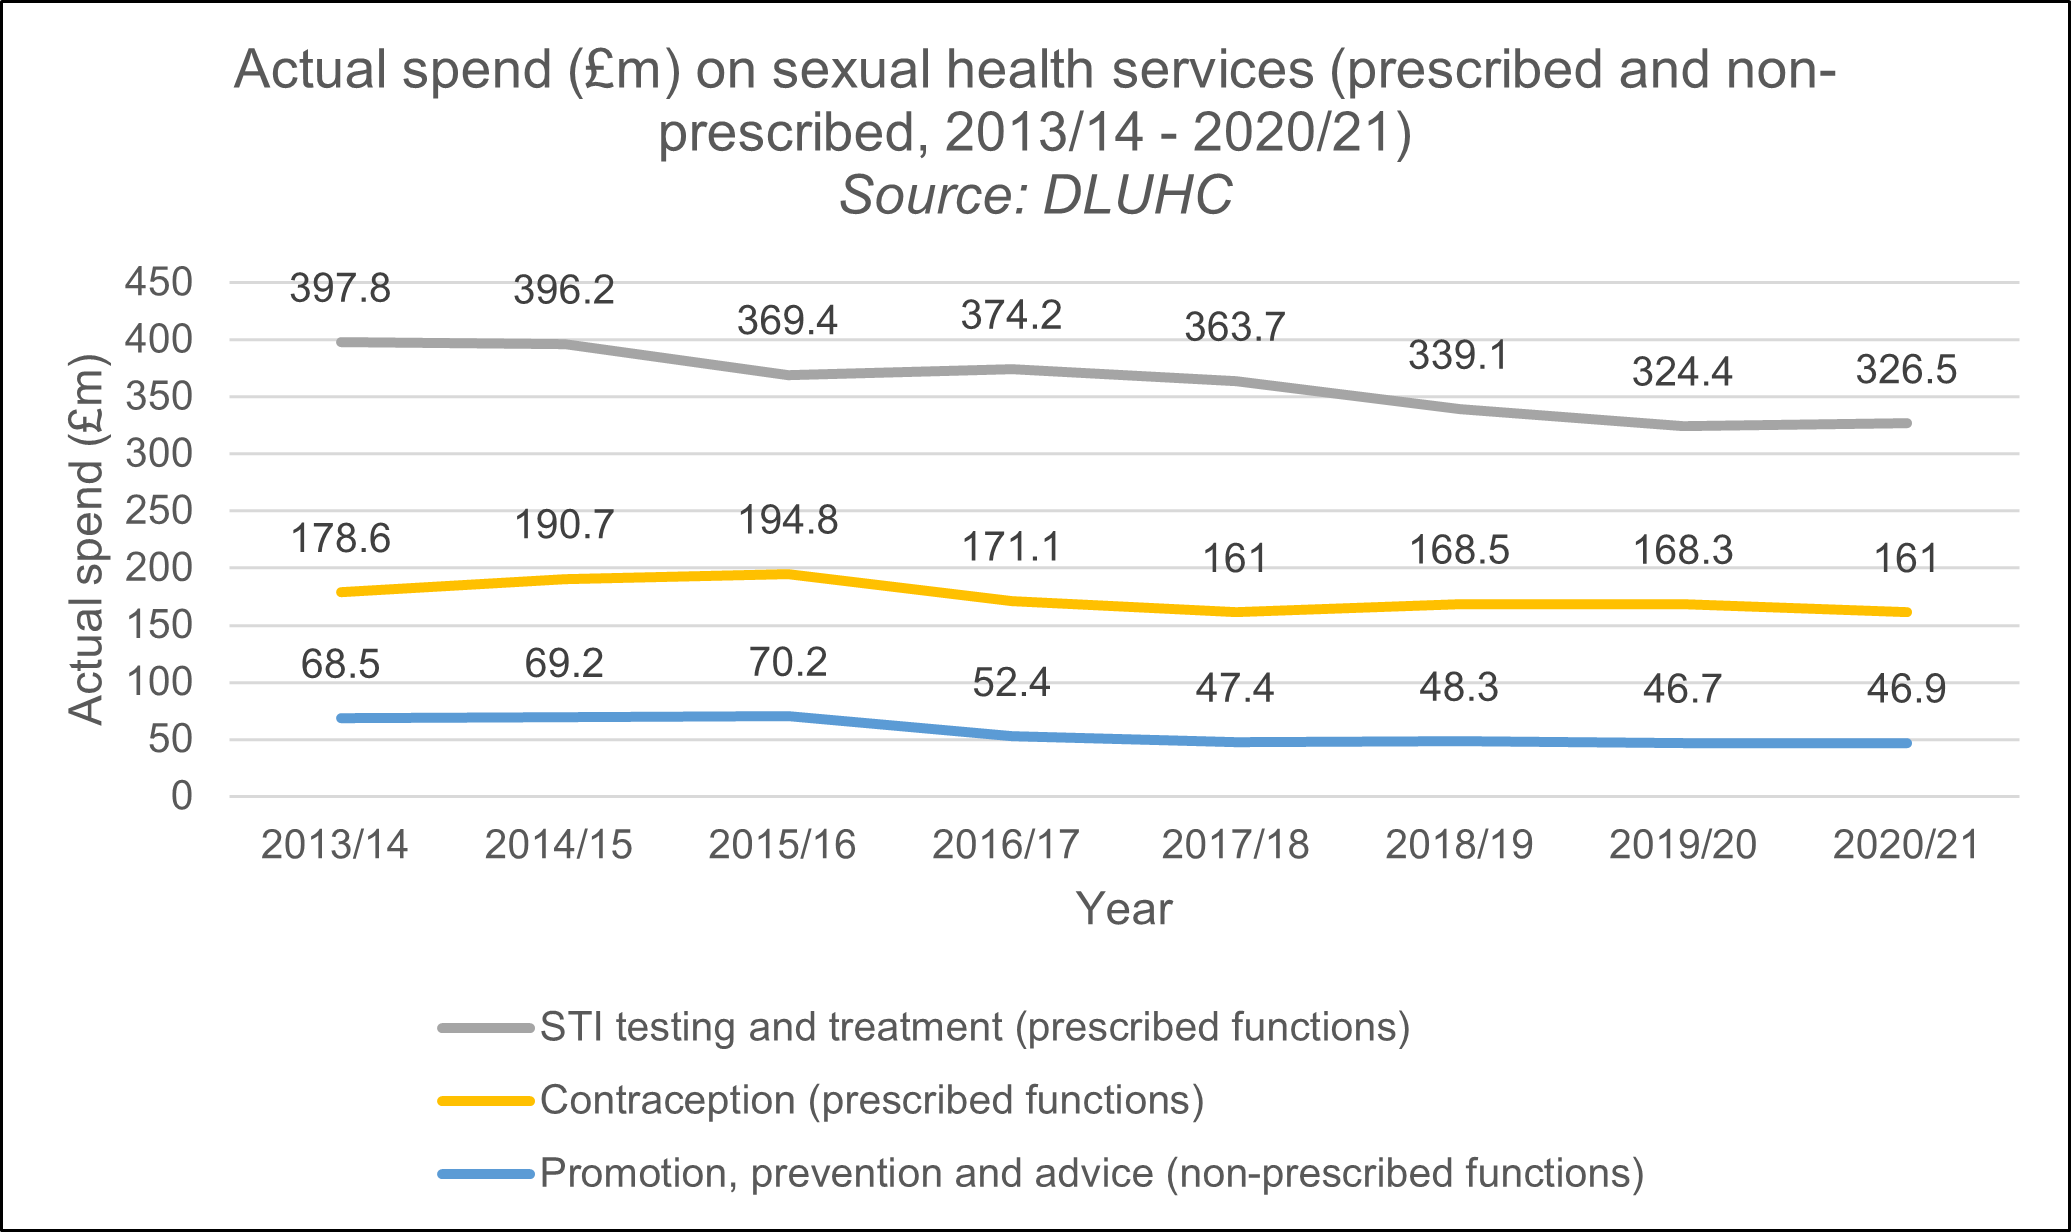 For STI testing and treatment (which is a prescribed function), spend decreased from £397.8 million in 2013/14 to £326.5 million in 2020/21. For contraception (which is a prescribed function) spend decreased from £178.6 million in 2013/14 to £161 million in 2020/21. For promotion, prevention and advice (which are non-prescribed functions), spend decreased from £68.5 million in 2013/14 to £46.9 million in 2020/21.